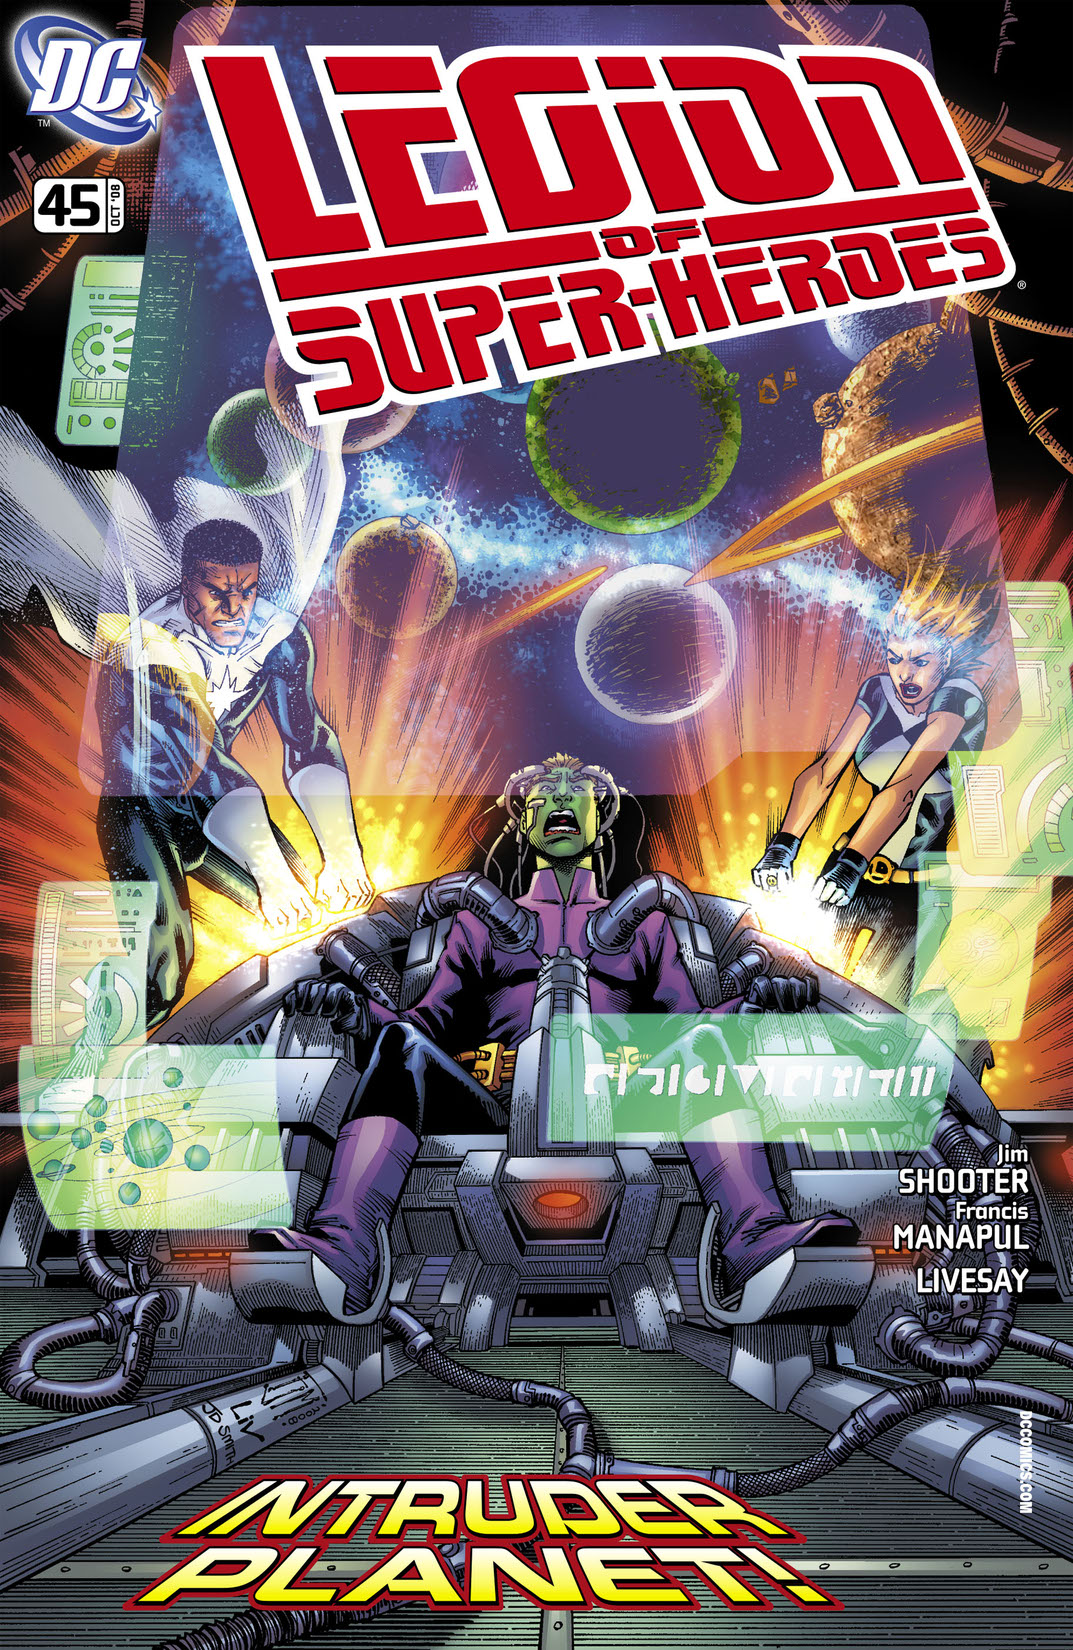 Legion of Super-Heroes (2007-) #45 preview images